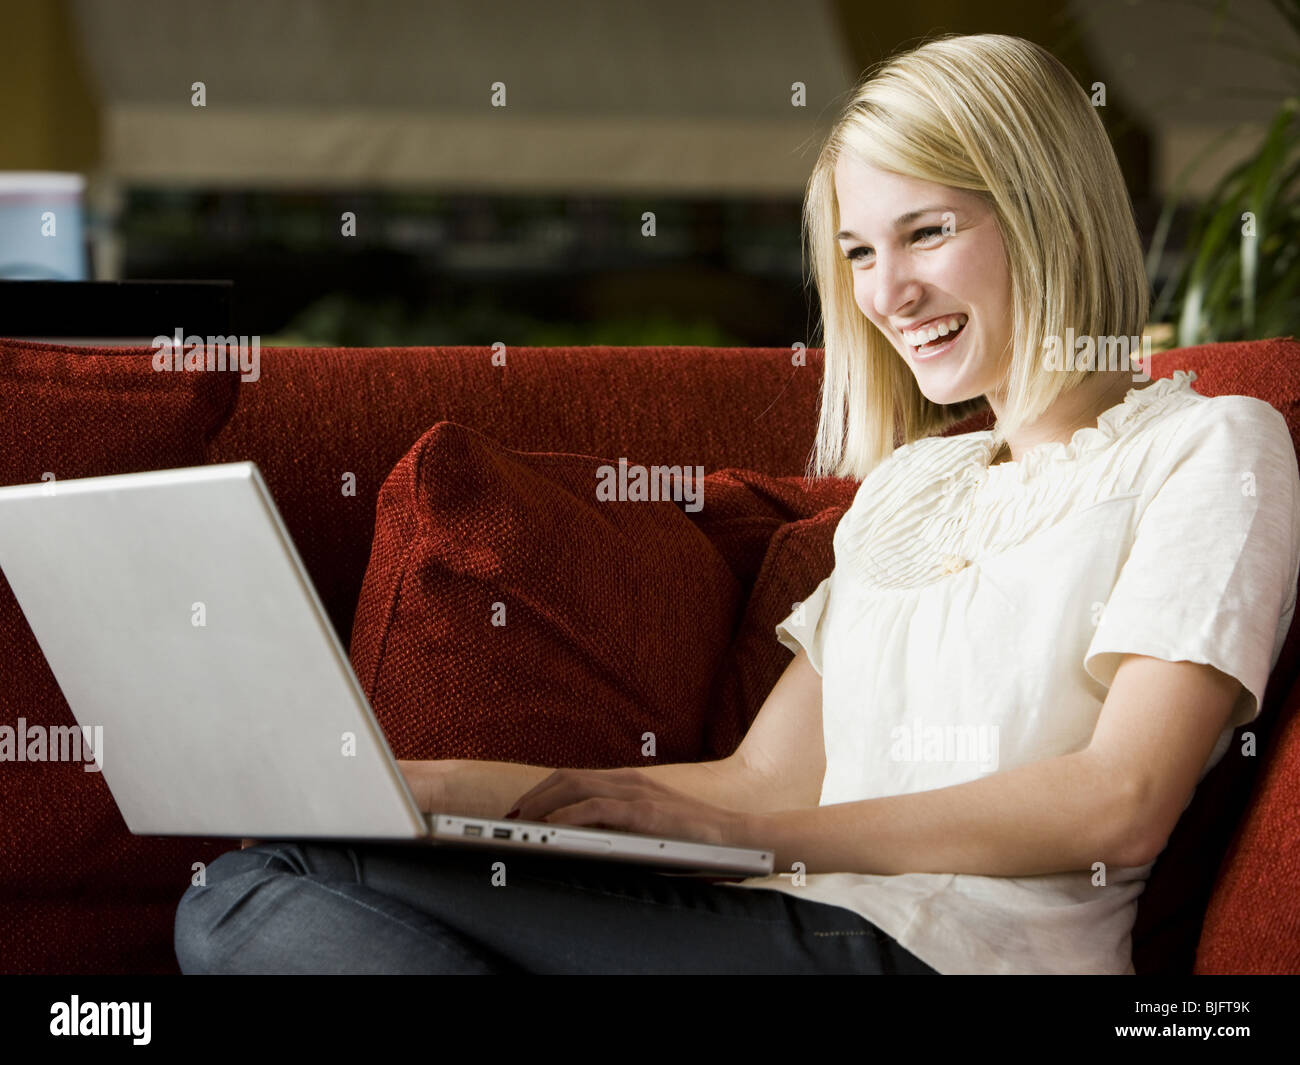 woman using laptop on the couch Stock Photo